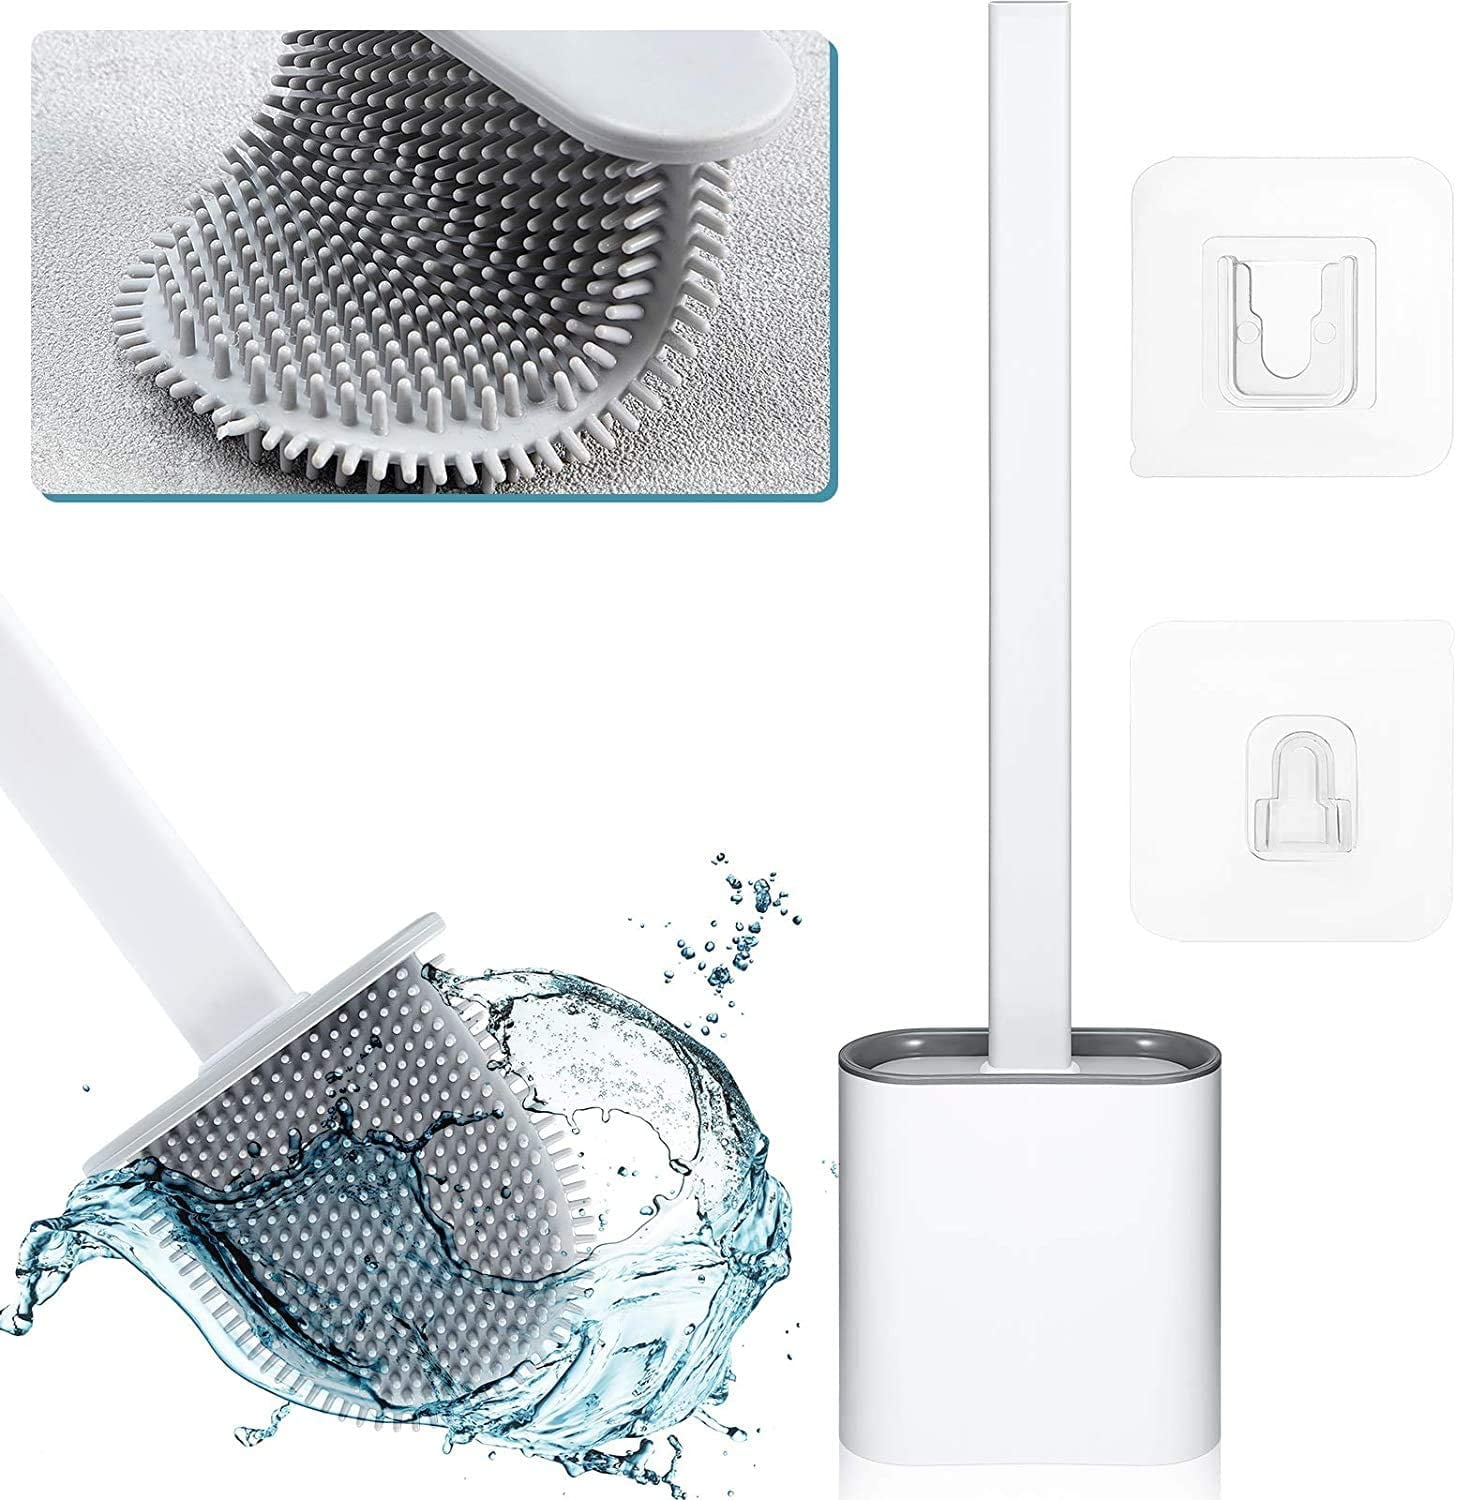 Details about   Freestanding Plastic Toilet Bowl Brush with Holder Deep Cleaning Light Blue New 